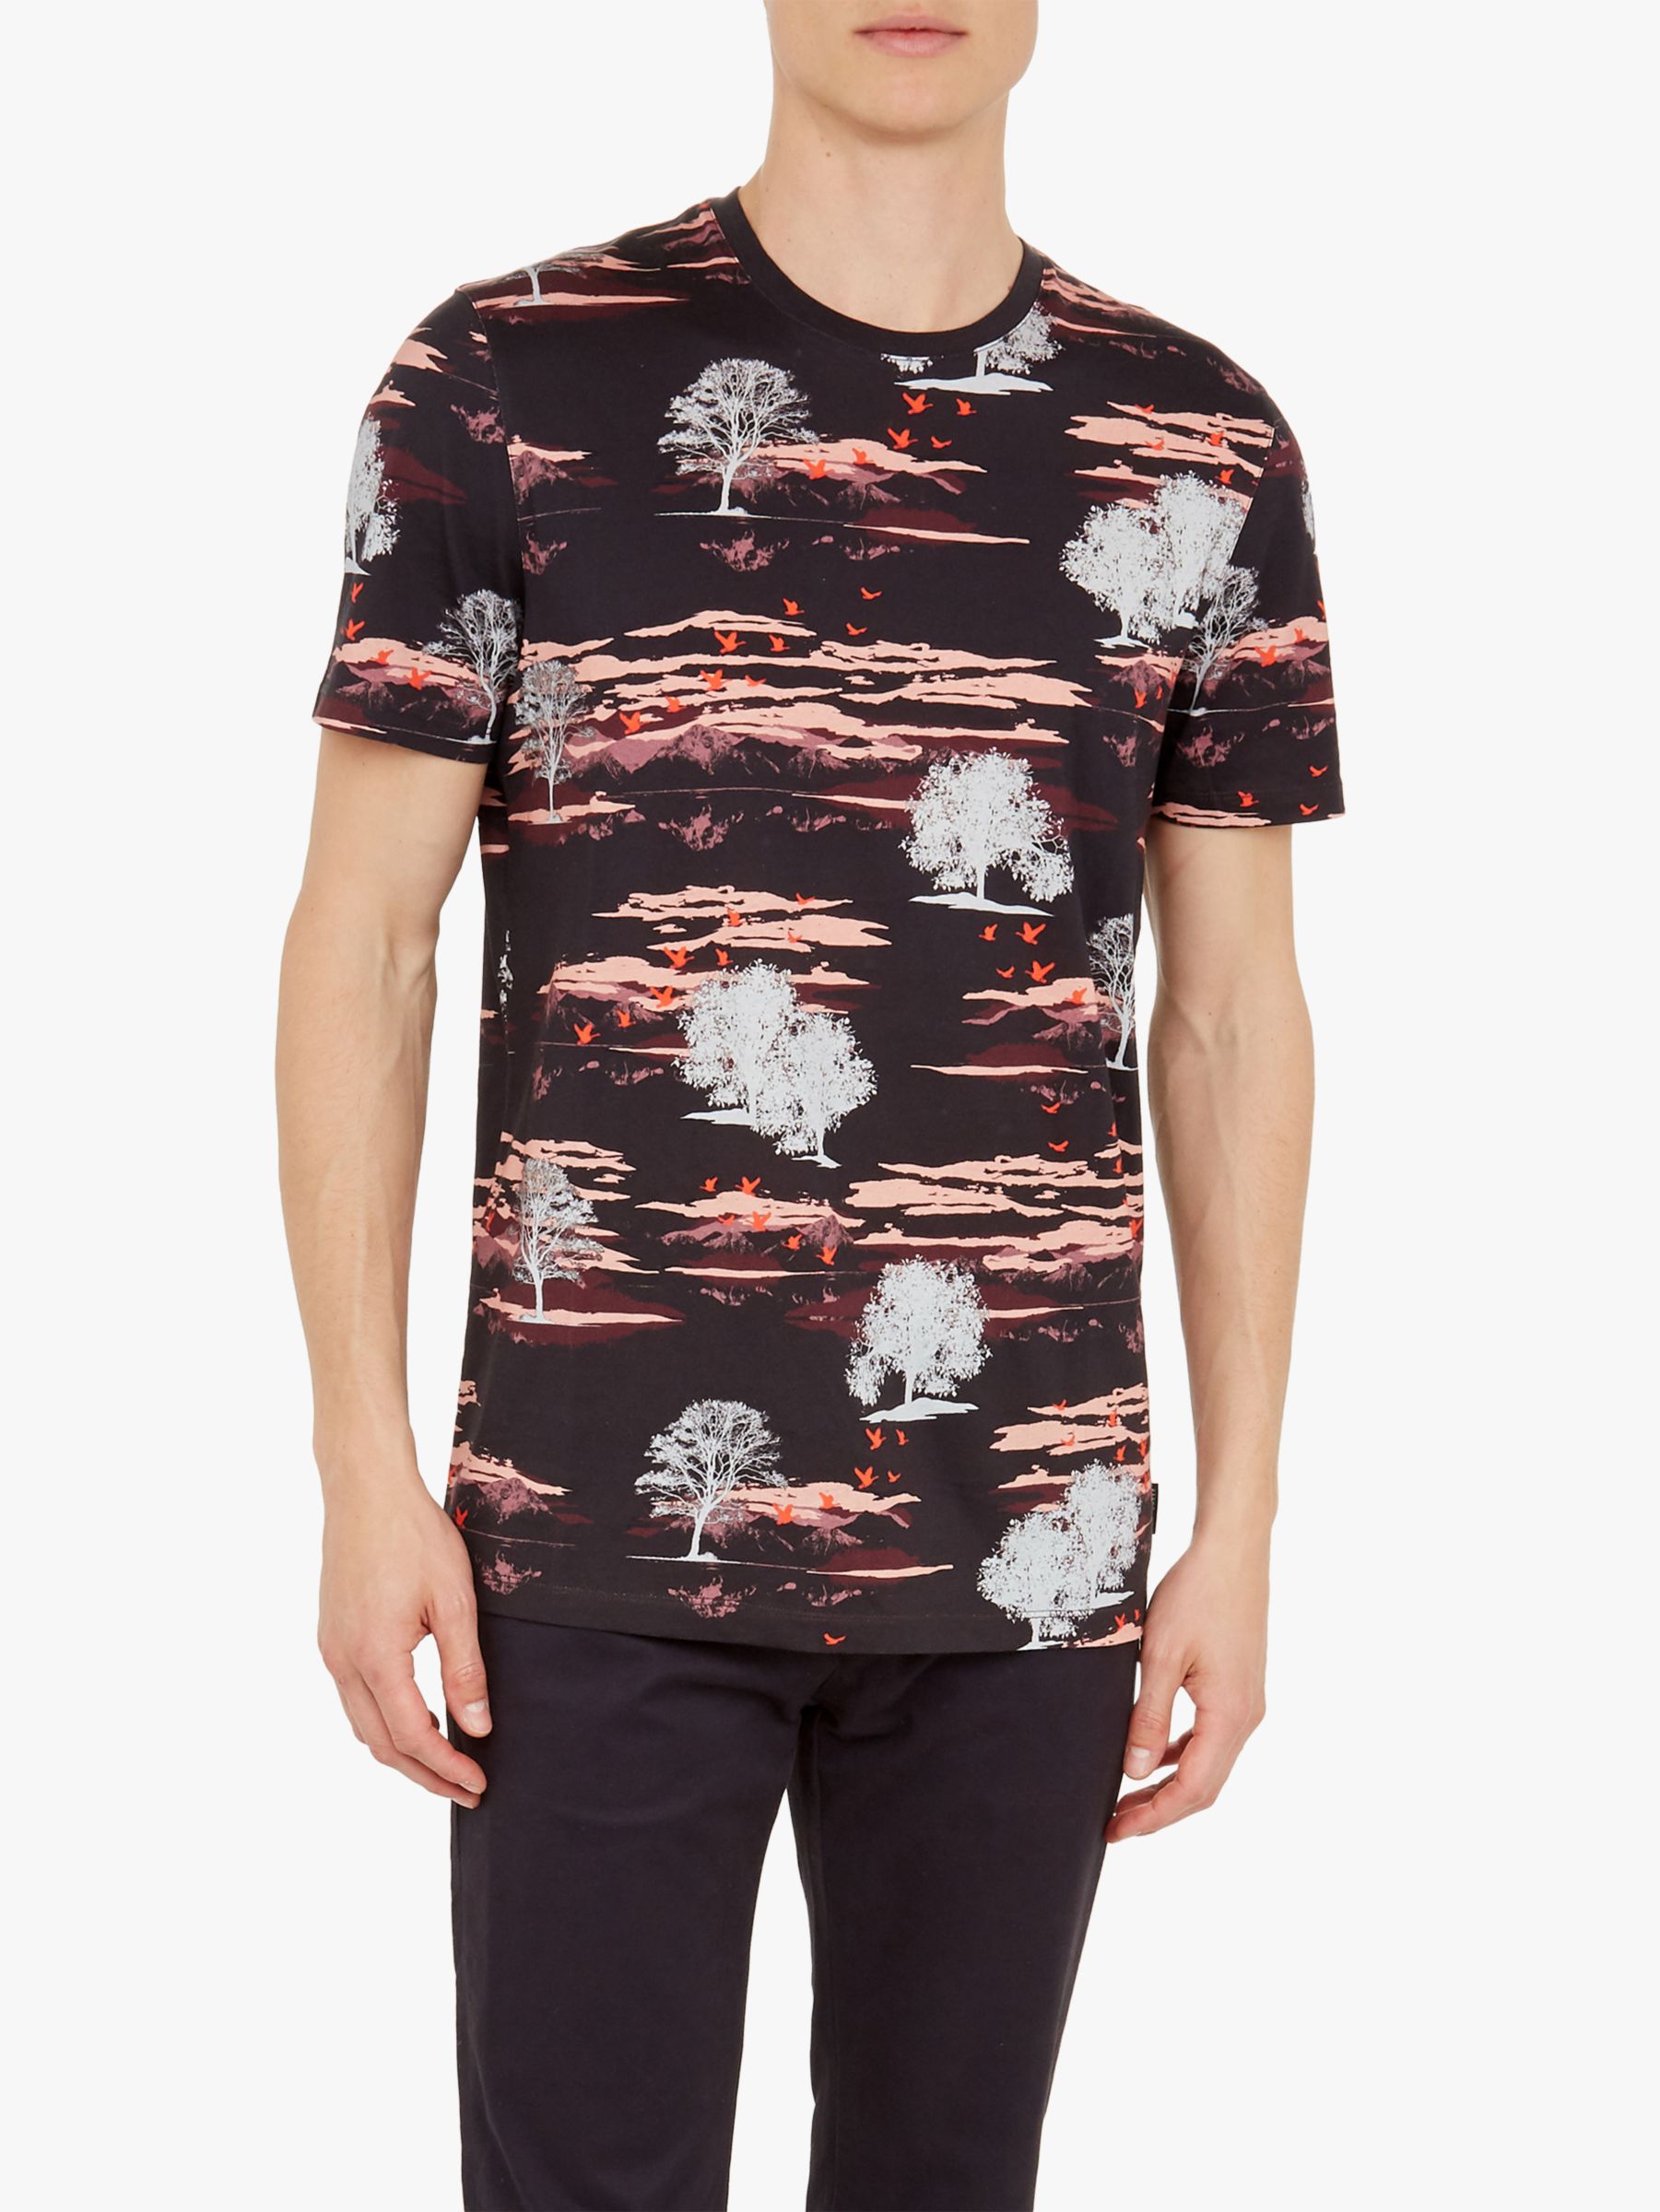 Ted Baker Happie All Over Printed T-Shirt, Dark Red